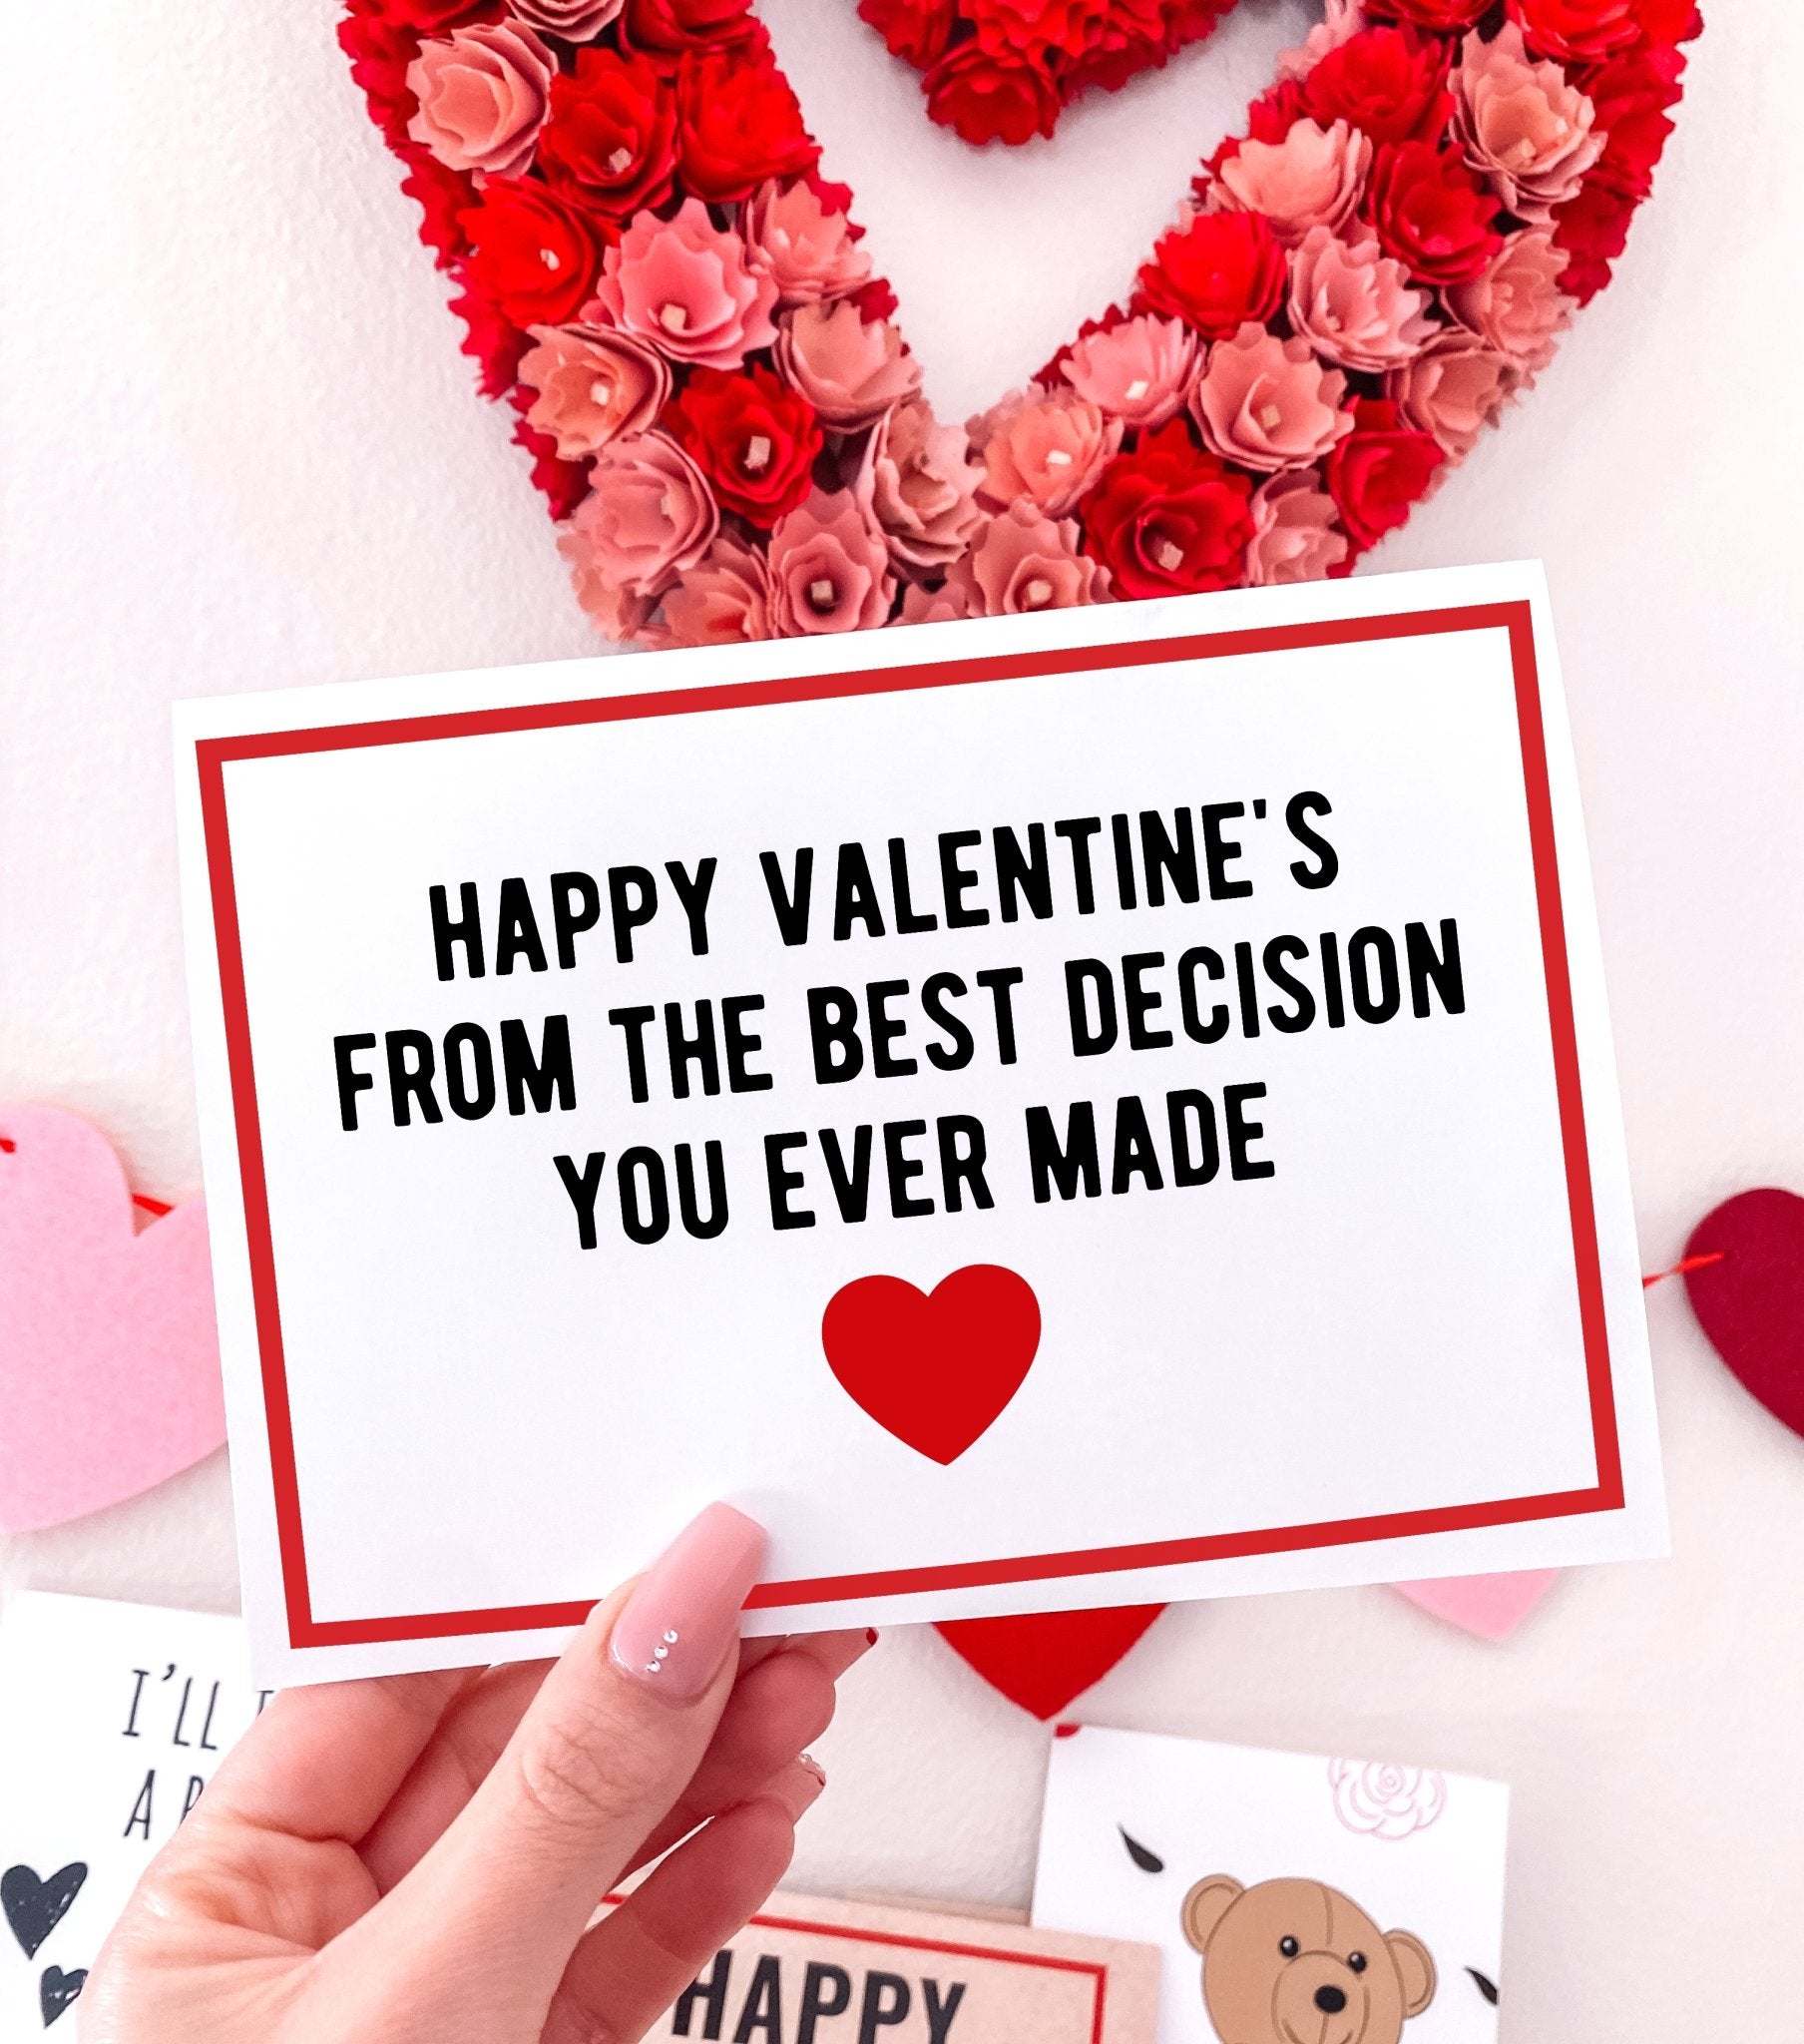 Happy Valentine's From The Best Decision You Ever Made Greeting Card - UntamedEgo LLC.